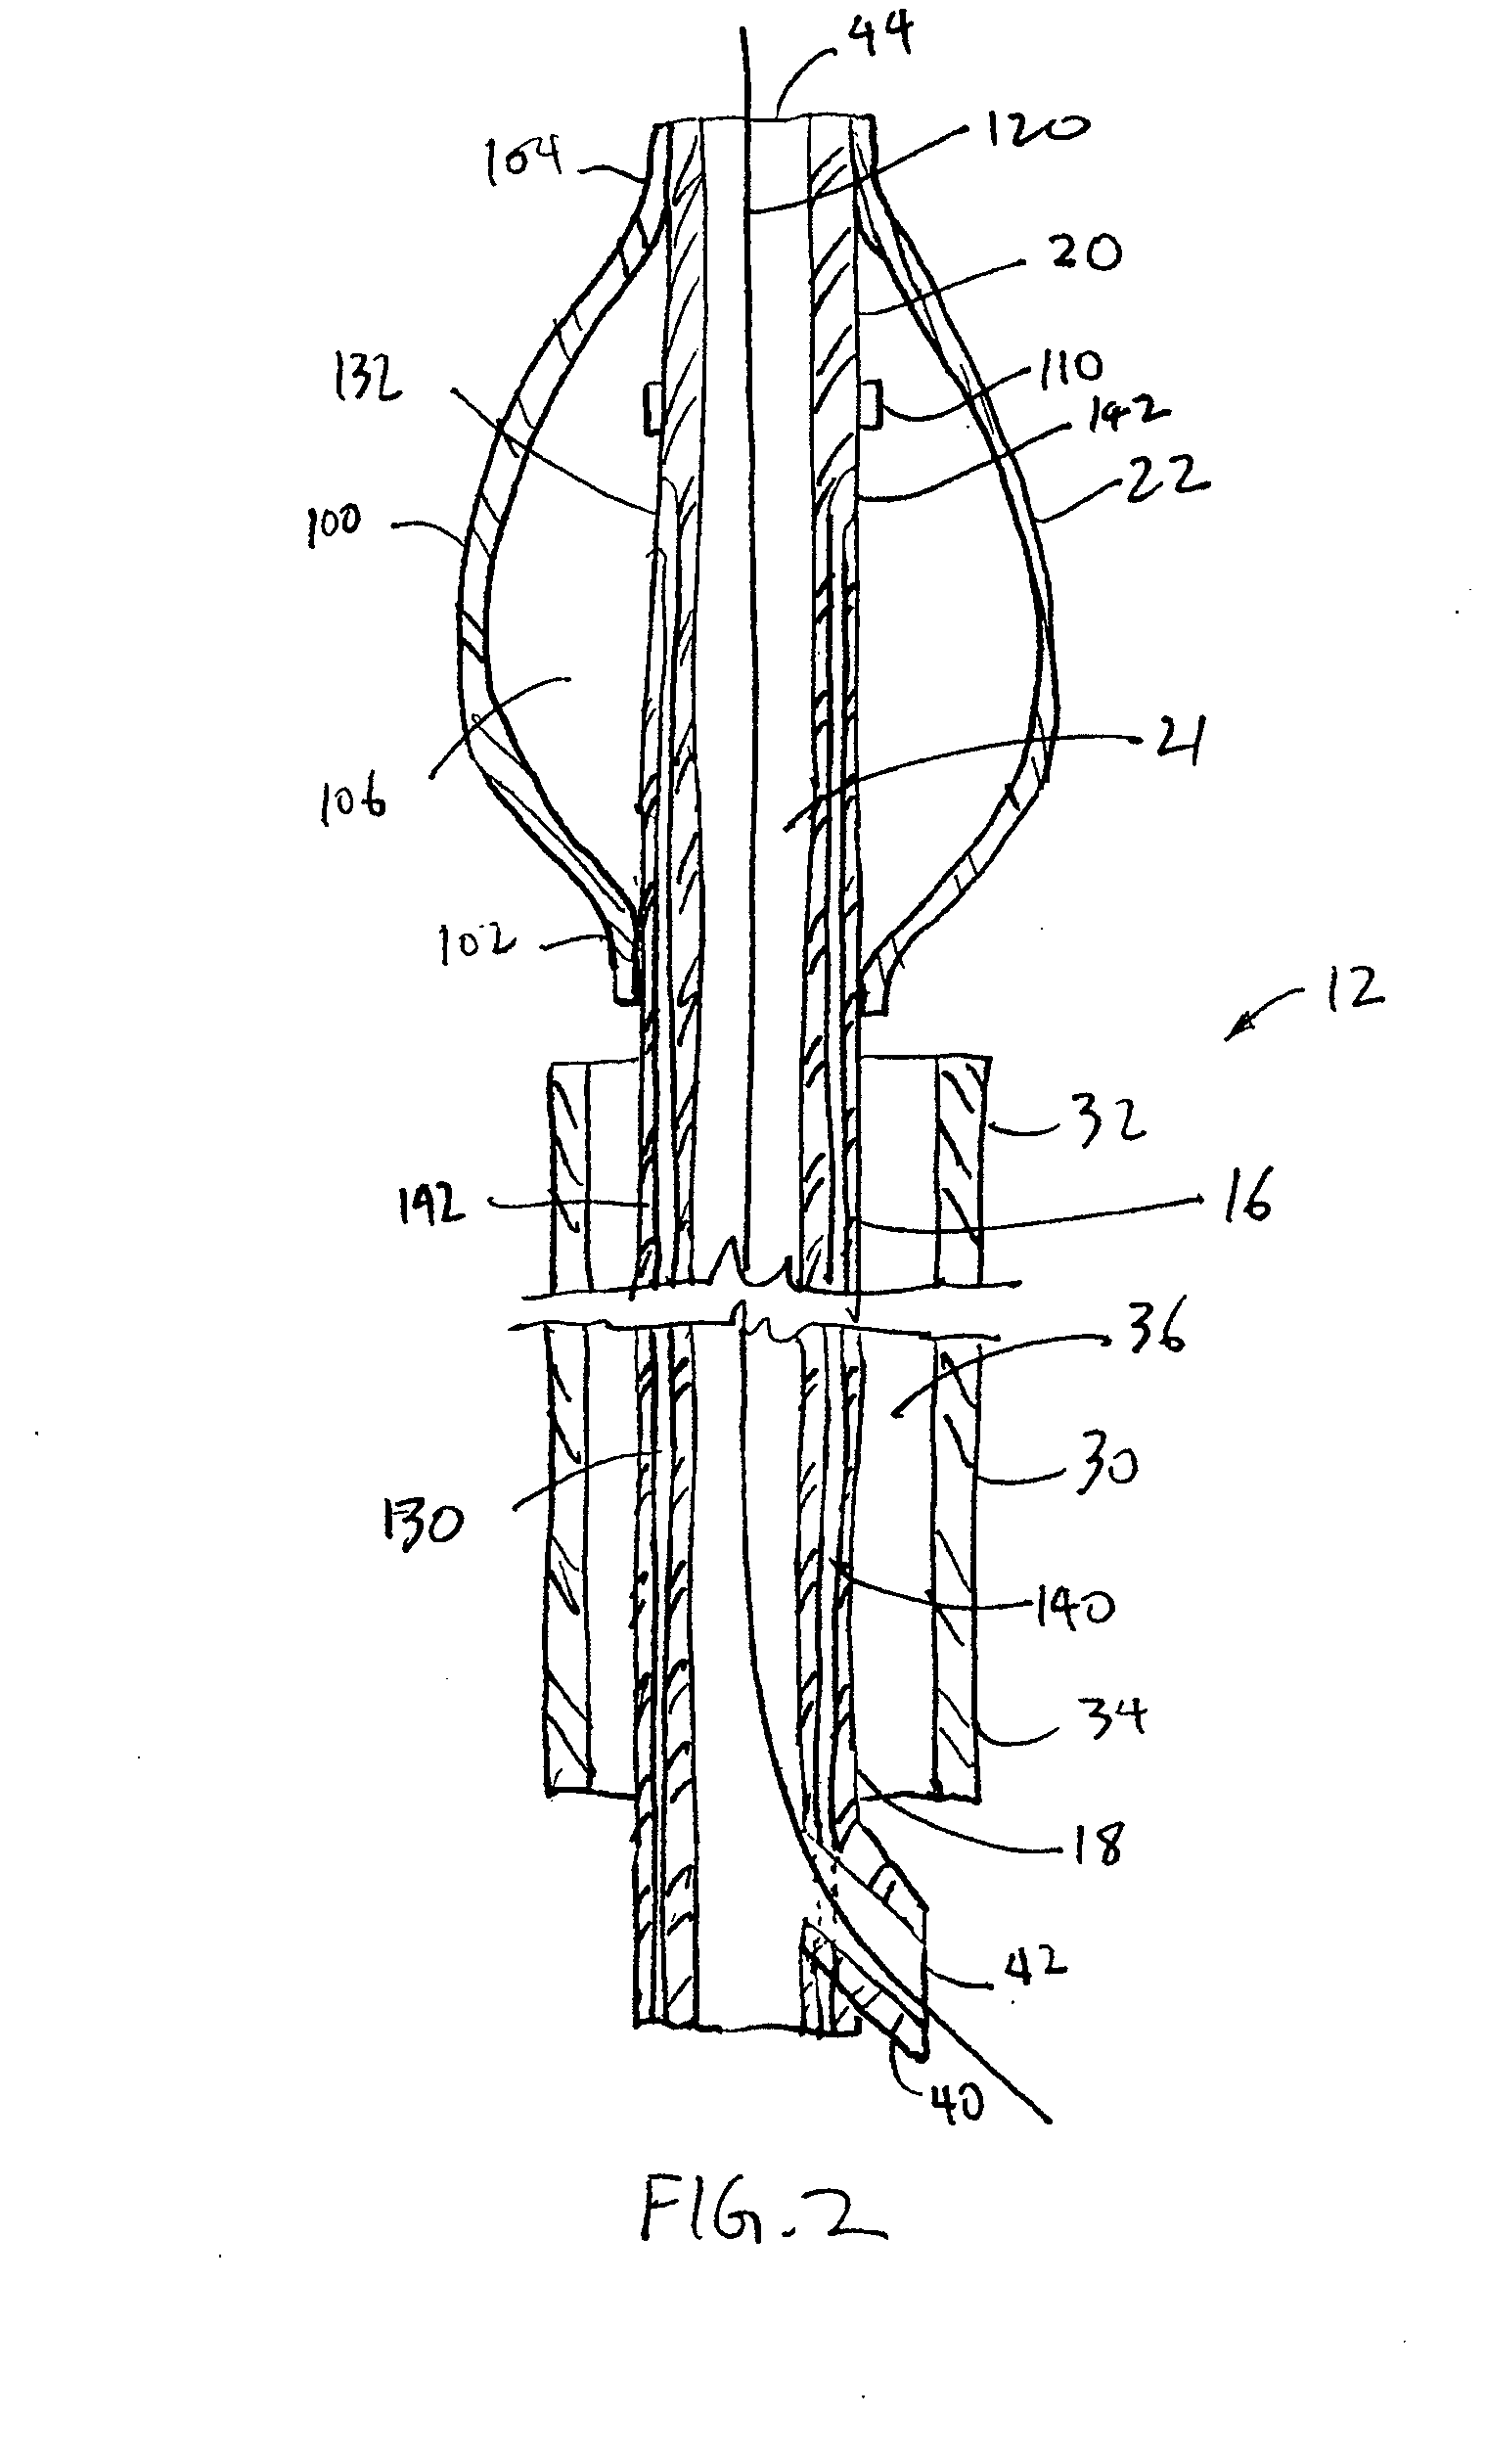 Method for tissue cryotherapy